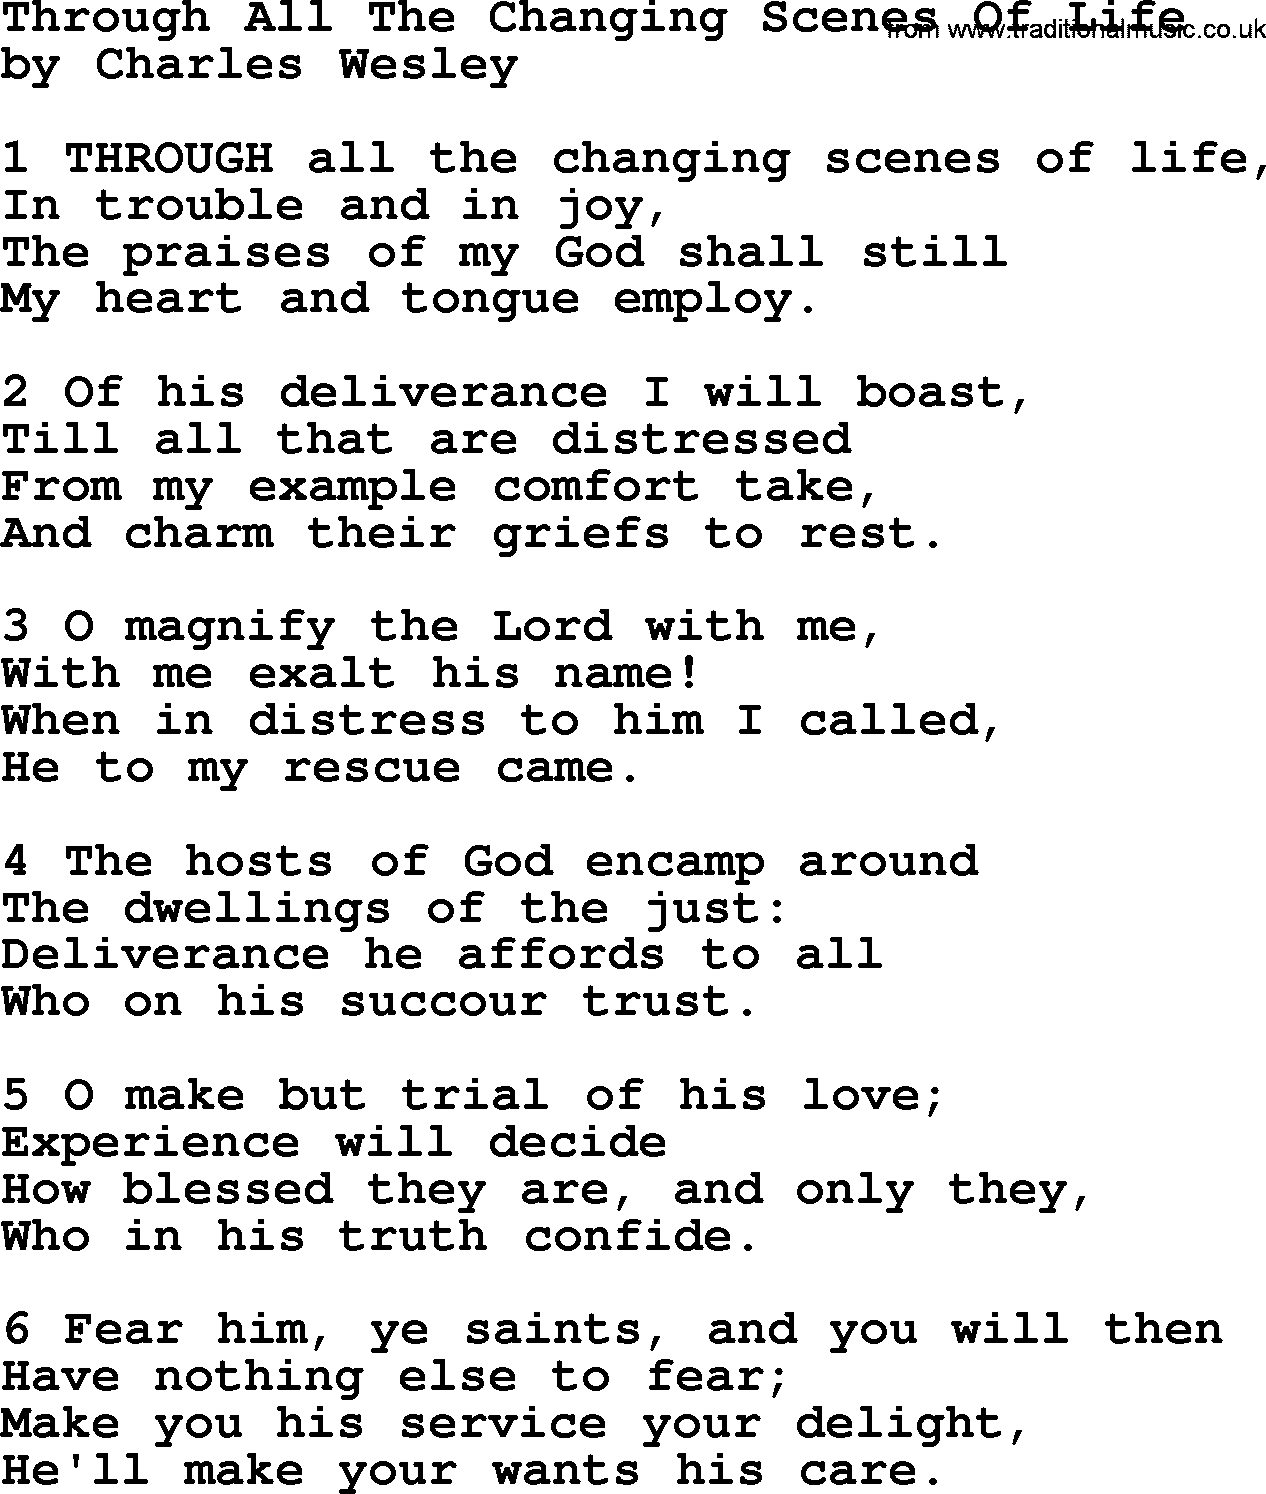 Charles Wesley hymn: Through All The Changing Scenes Of Life, lyrics